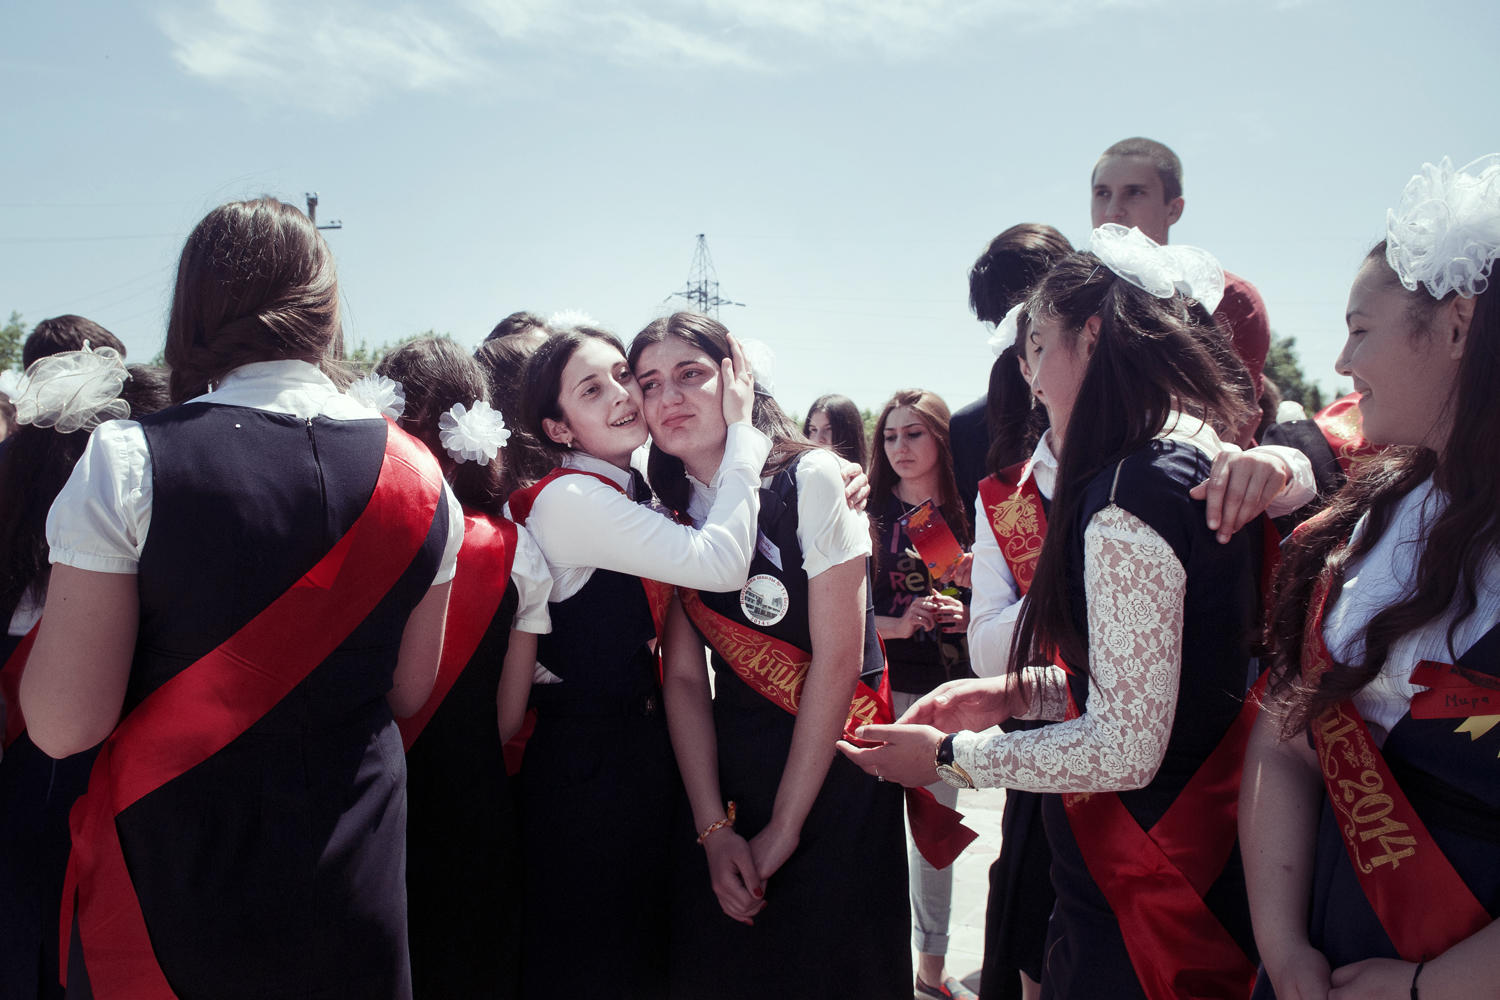 Graduates hugging each other during the graduation ceremony. Beslan. May 2014.